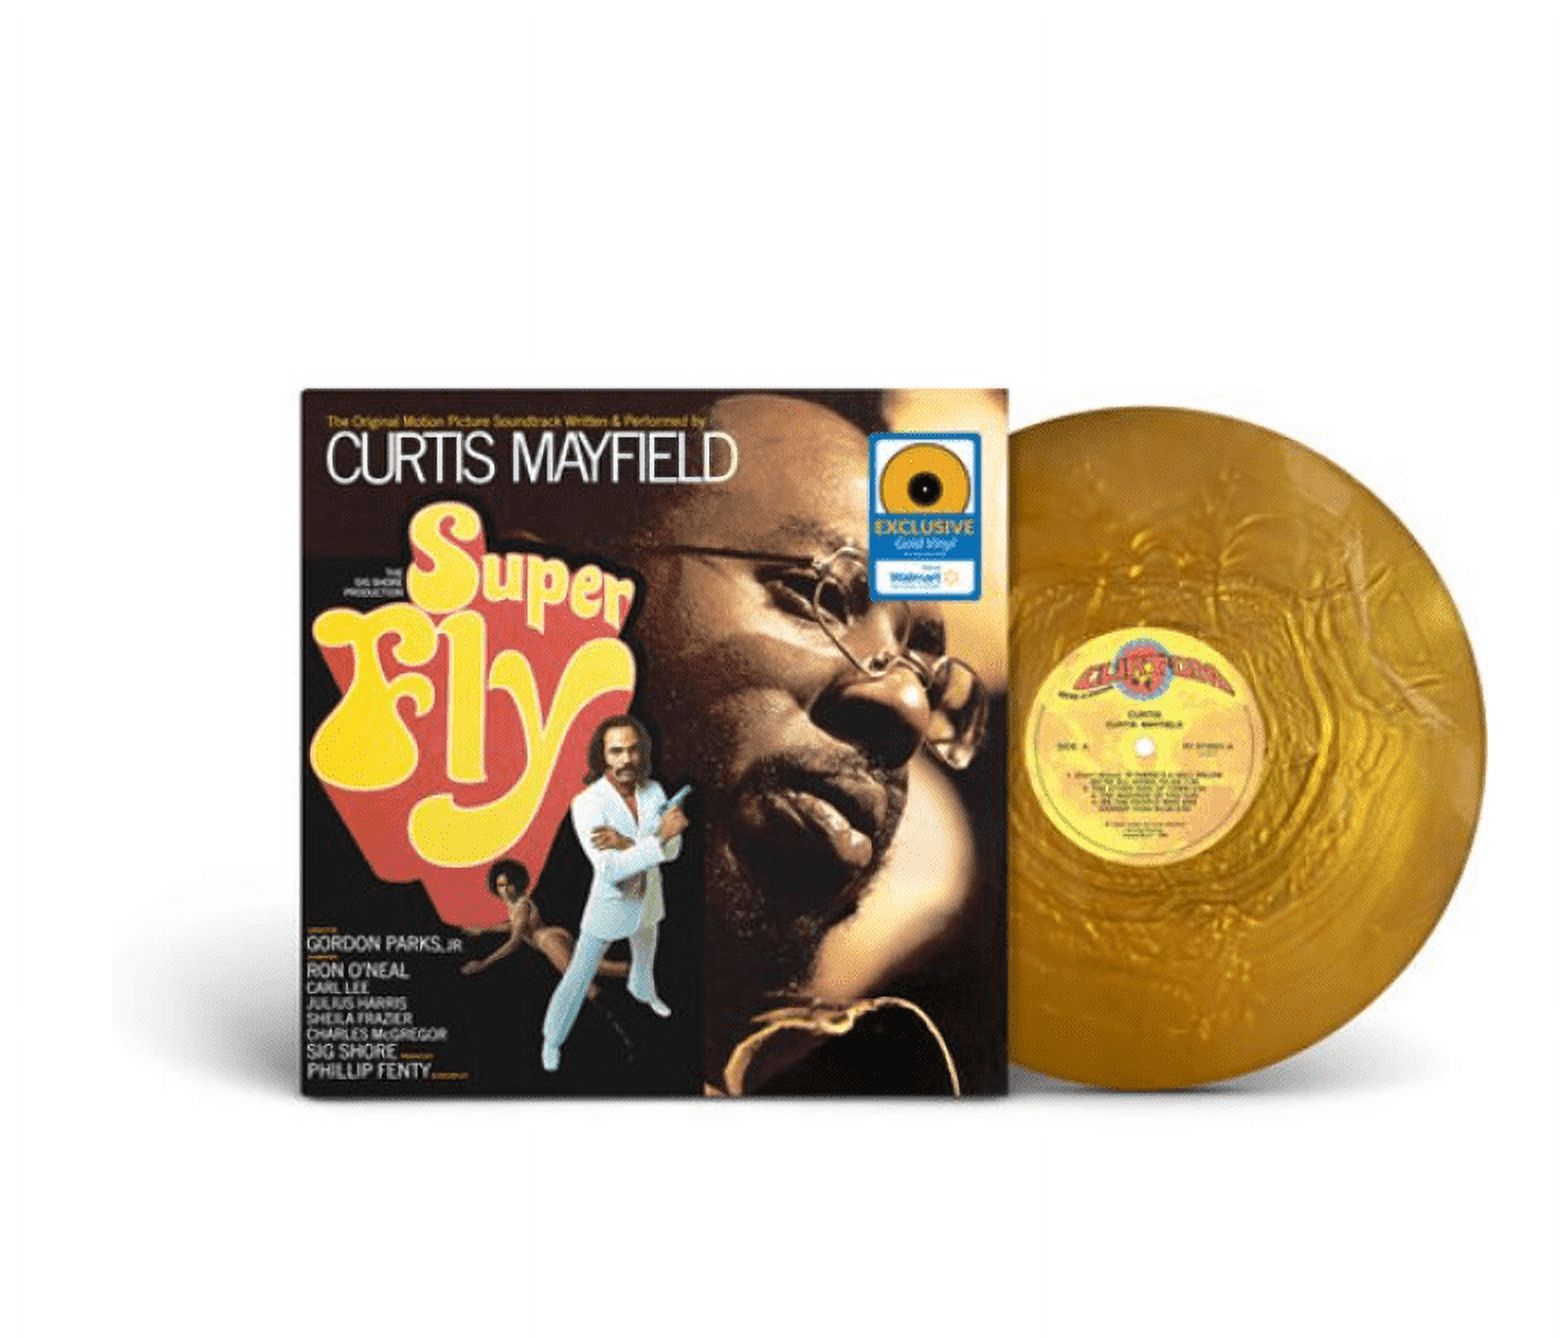 Curtis Mayfield - Superfly (Gold Vinyl) - R&B / Soul [Exclusive] - image 2 of 3